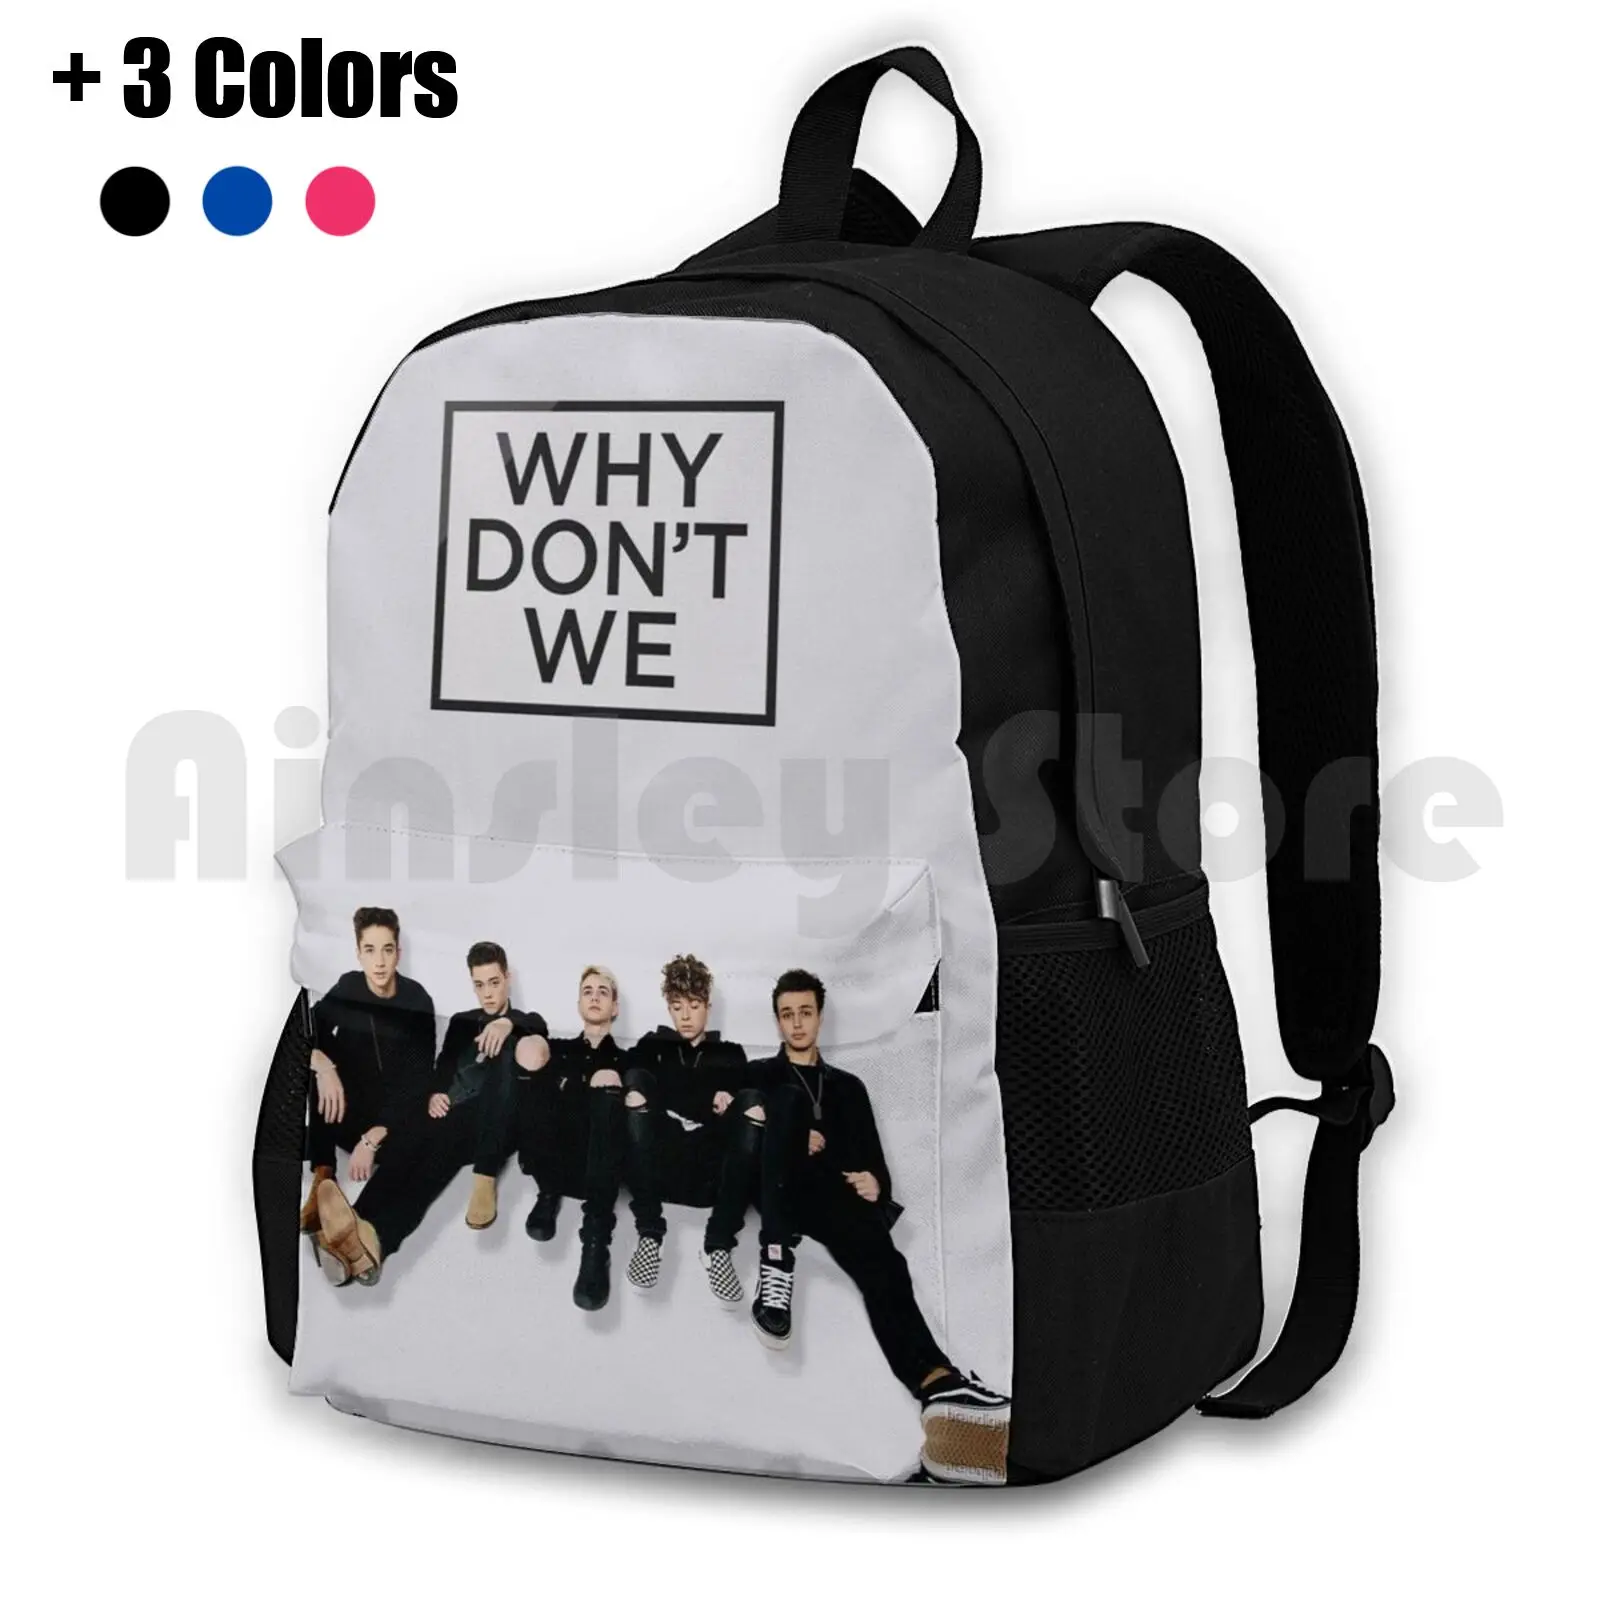 

Wdw Collage Outdoor Hiking Backpack Riding Climbing Sports Bag Why Dont We Band Group Group Band Hollywood London Paris Music